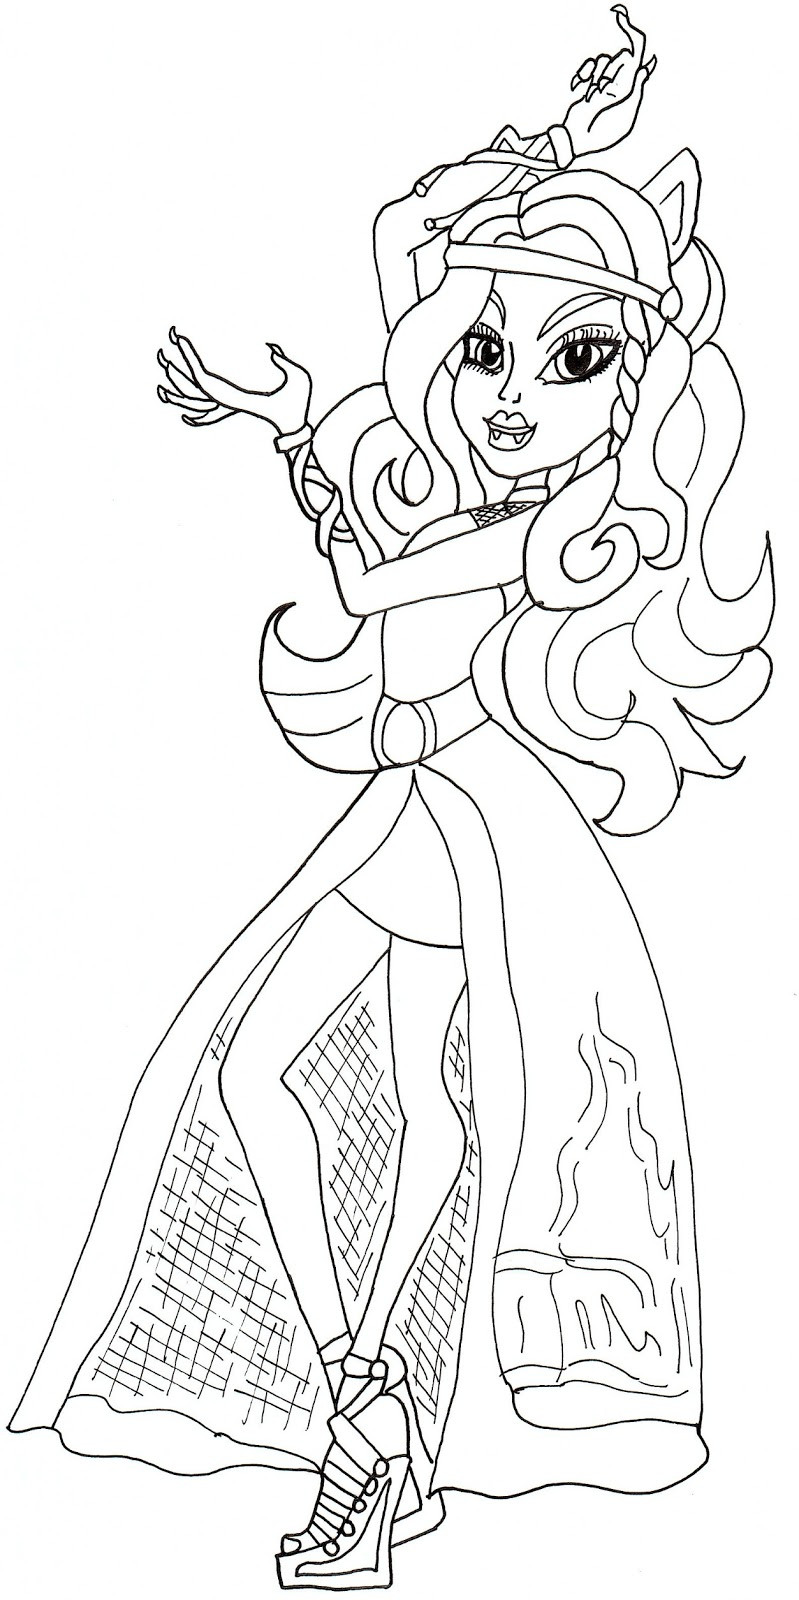 Free Printable Monster High Coloring Pages
 Free Printable Monster High Coloring Pages June 2013